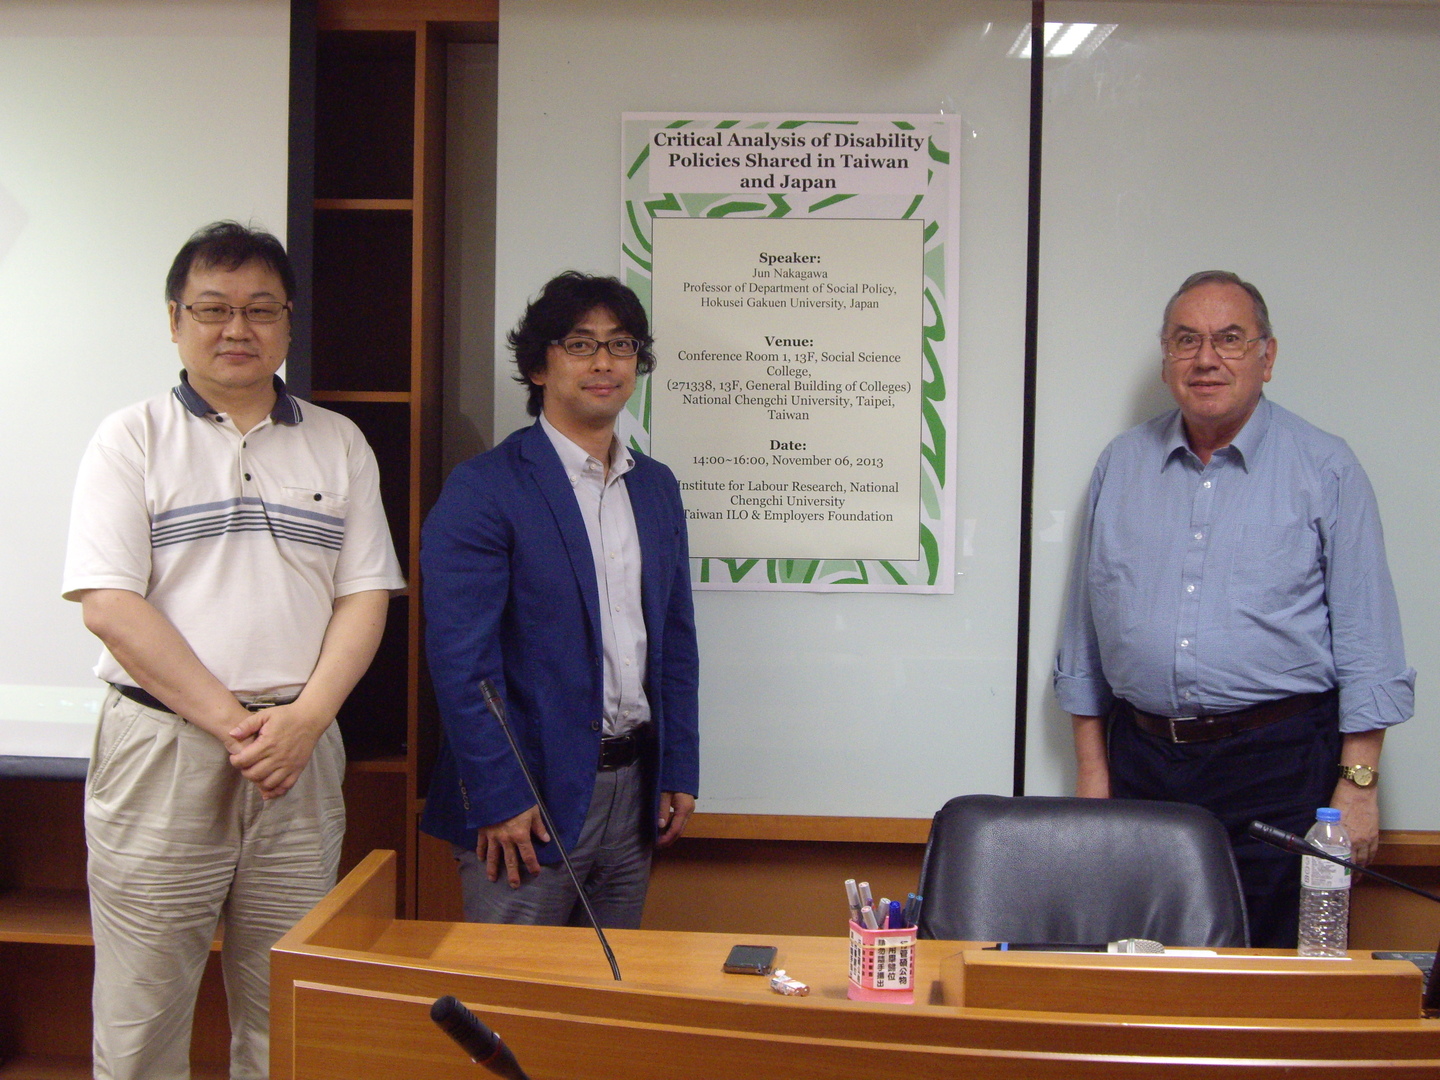 Critical Analysis of Disability Policies Shared in Taiwan and Japan (2013.11.06)